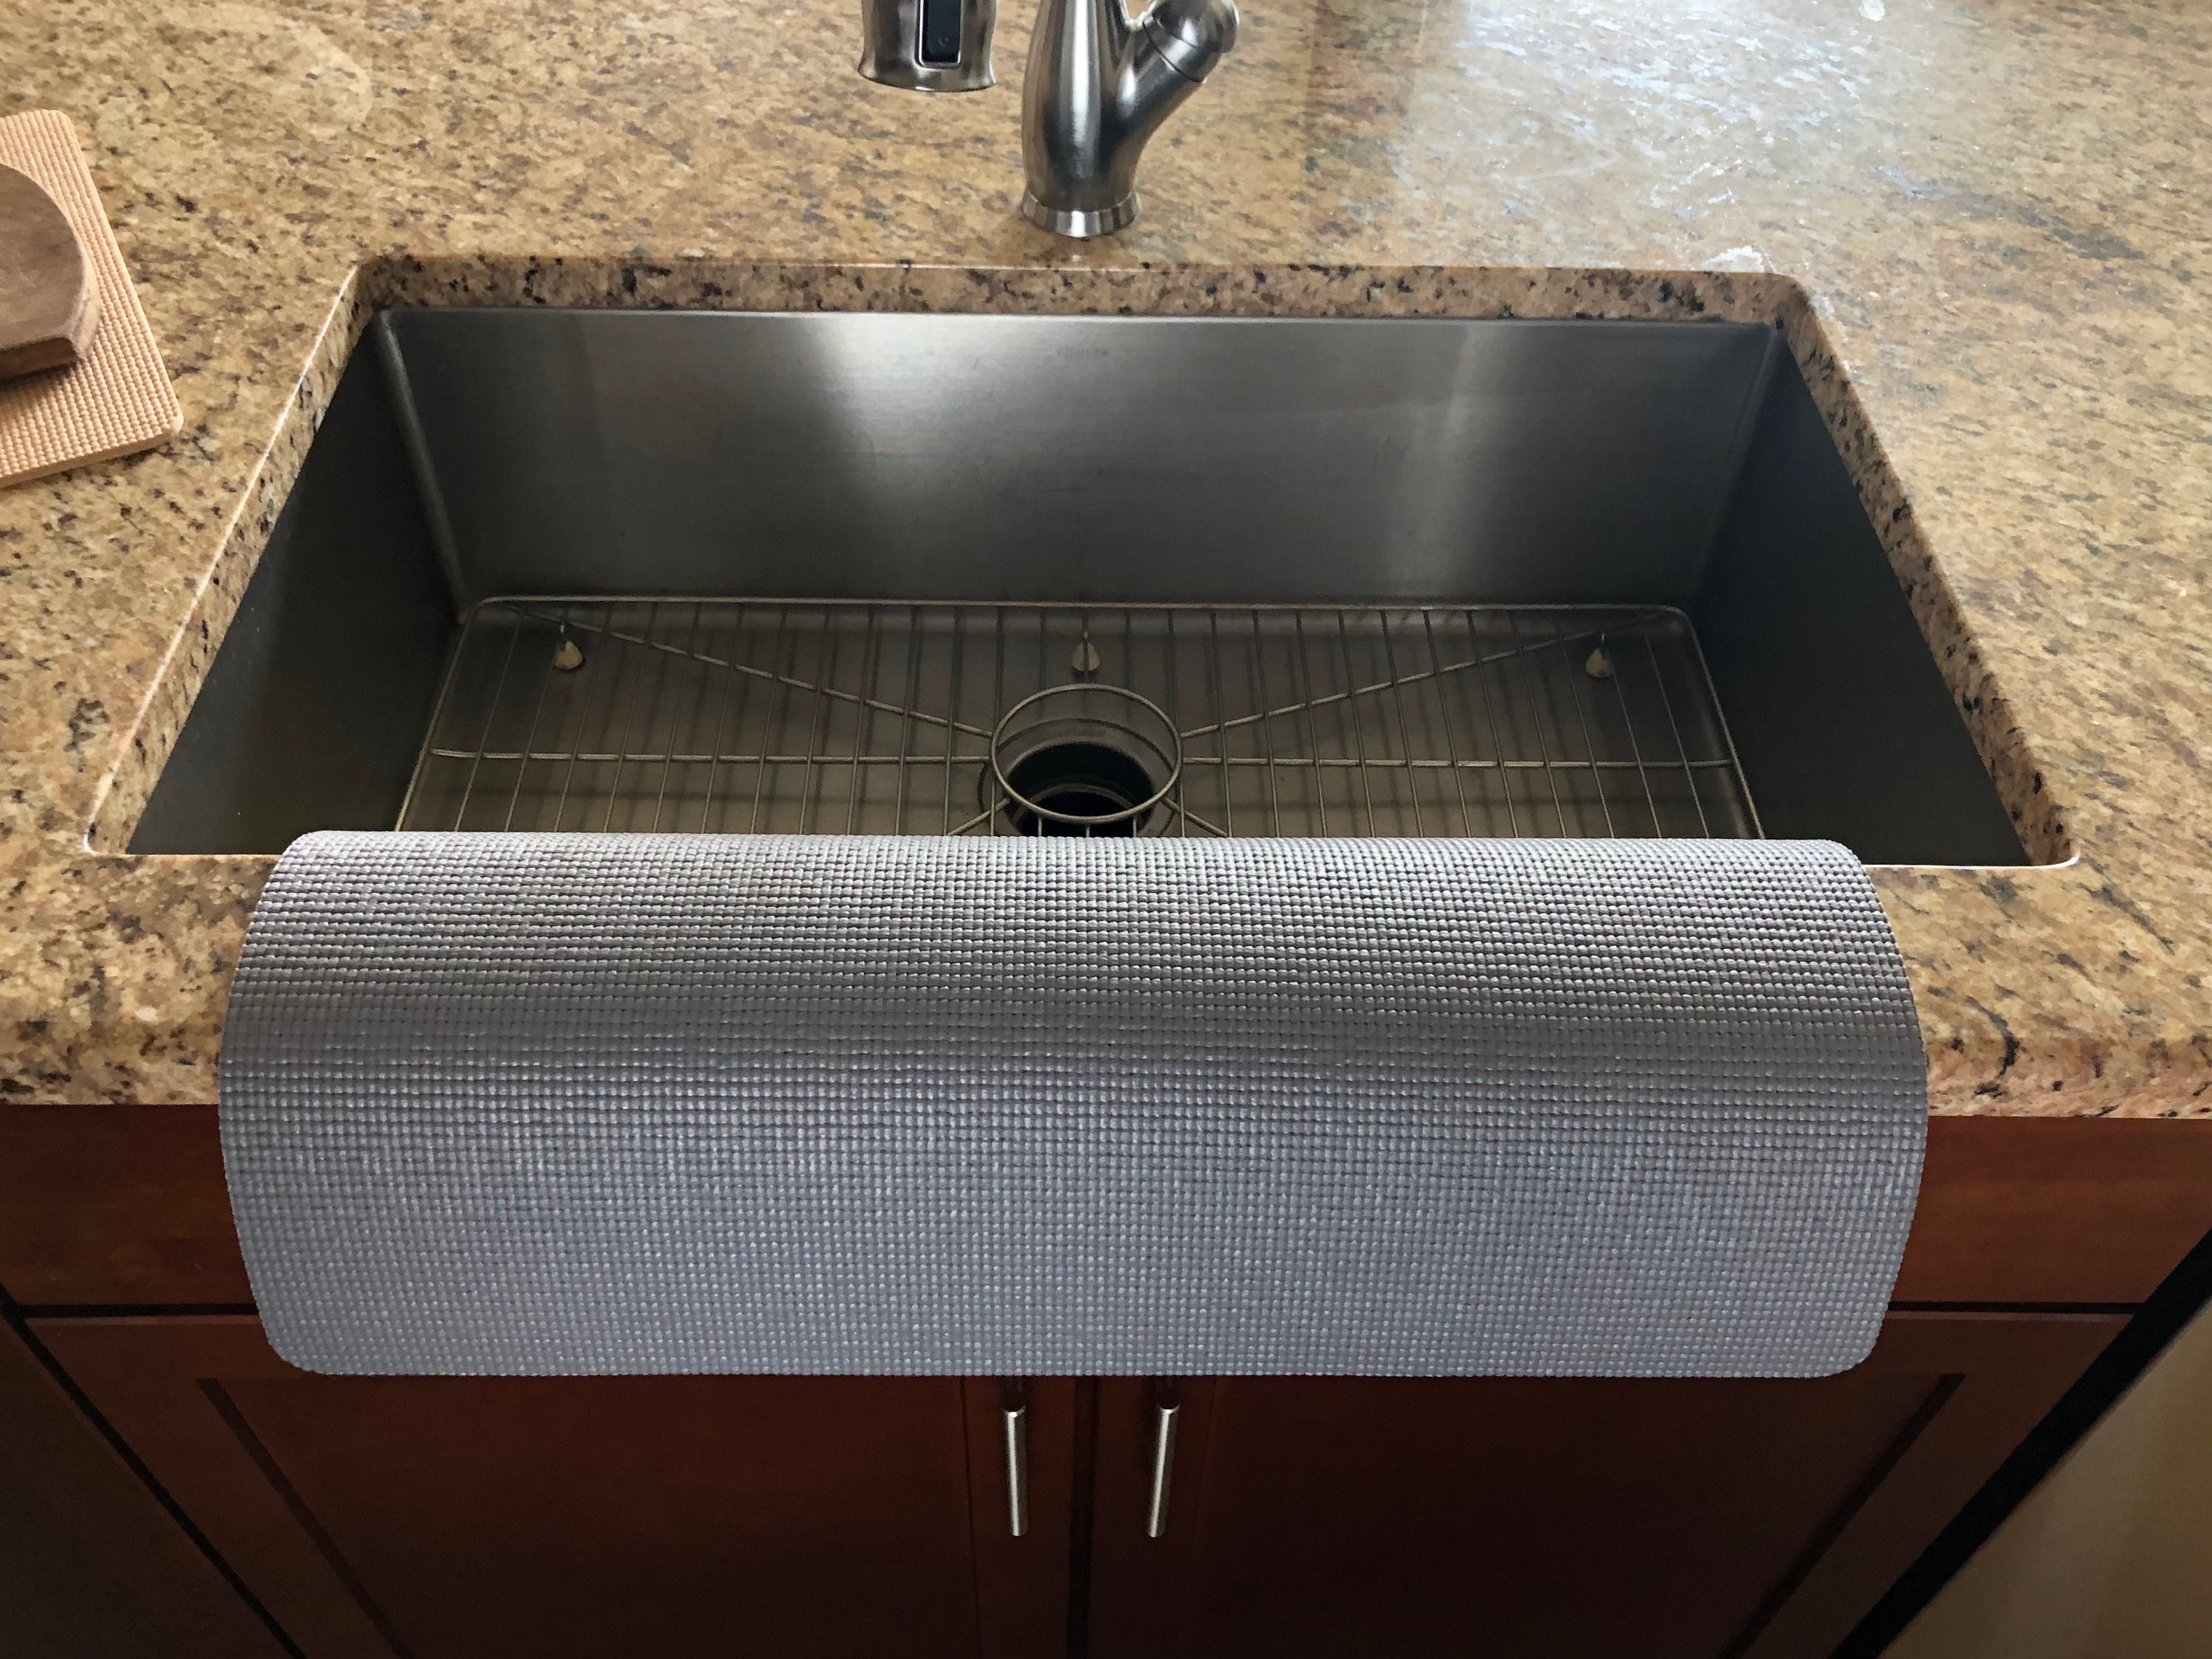 White Kitchen SINK EDGE GUARD, Protects Granite From Chipping, Countertop  Mat, Drip Catcher, Water Splash Guard, 13.5 in Wide X 23 in Length 